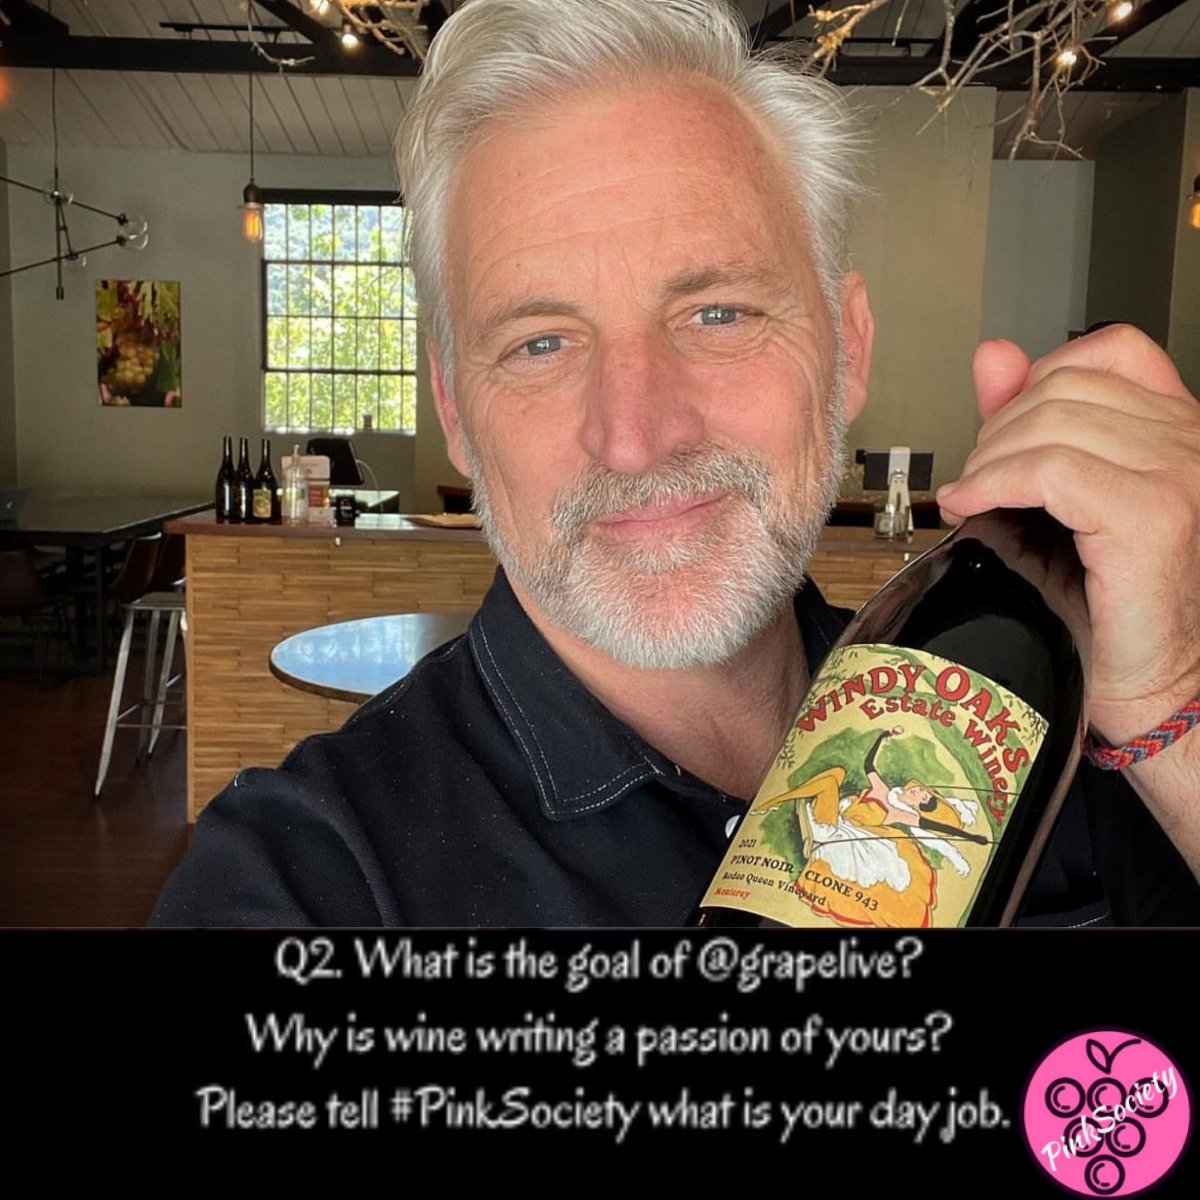 Q2. What is the goal of @grapelive? Why is wine writing a passion of yours? Please tell #PinkSociety what is your day job. @jflorez @boozychef @_drazzari @redwinecats @AskRobY @Kerryloves2trvl @myvinespot @WineOnTheDime @rr_pirate